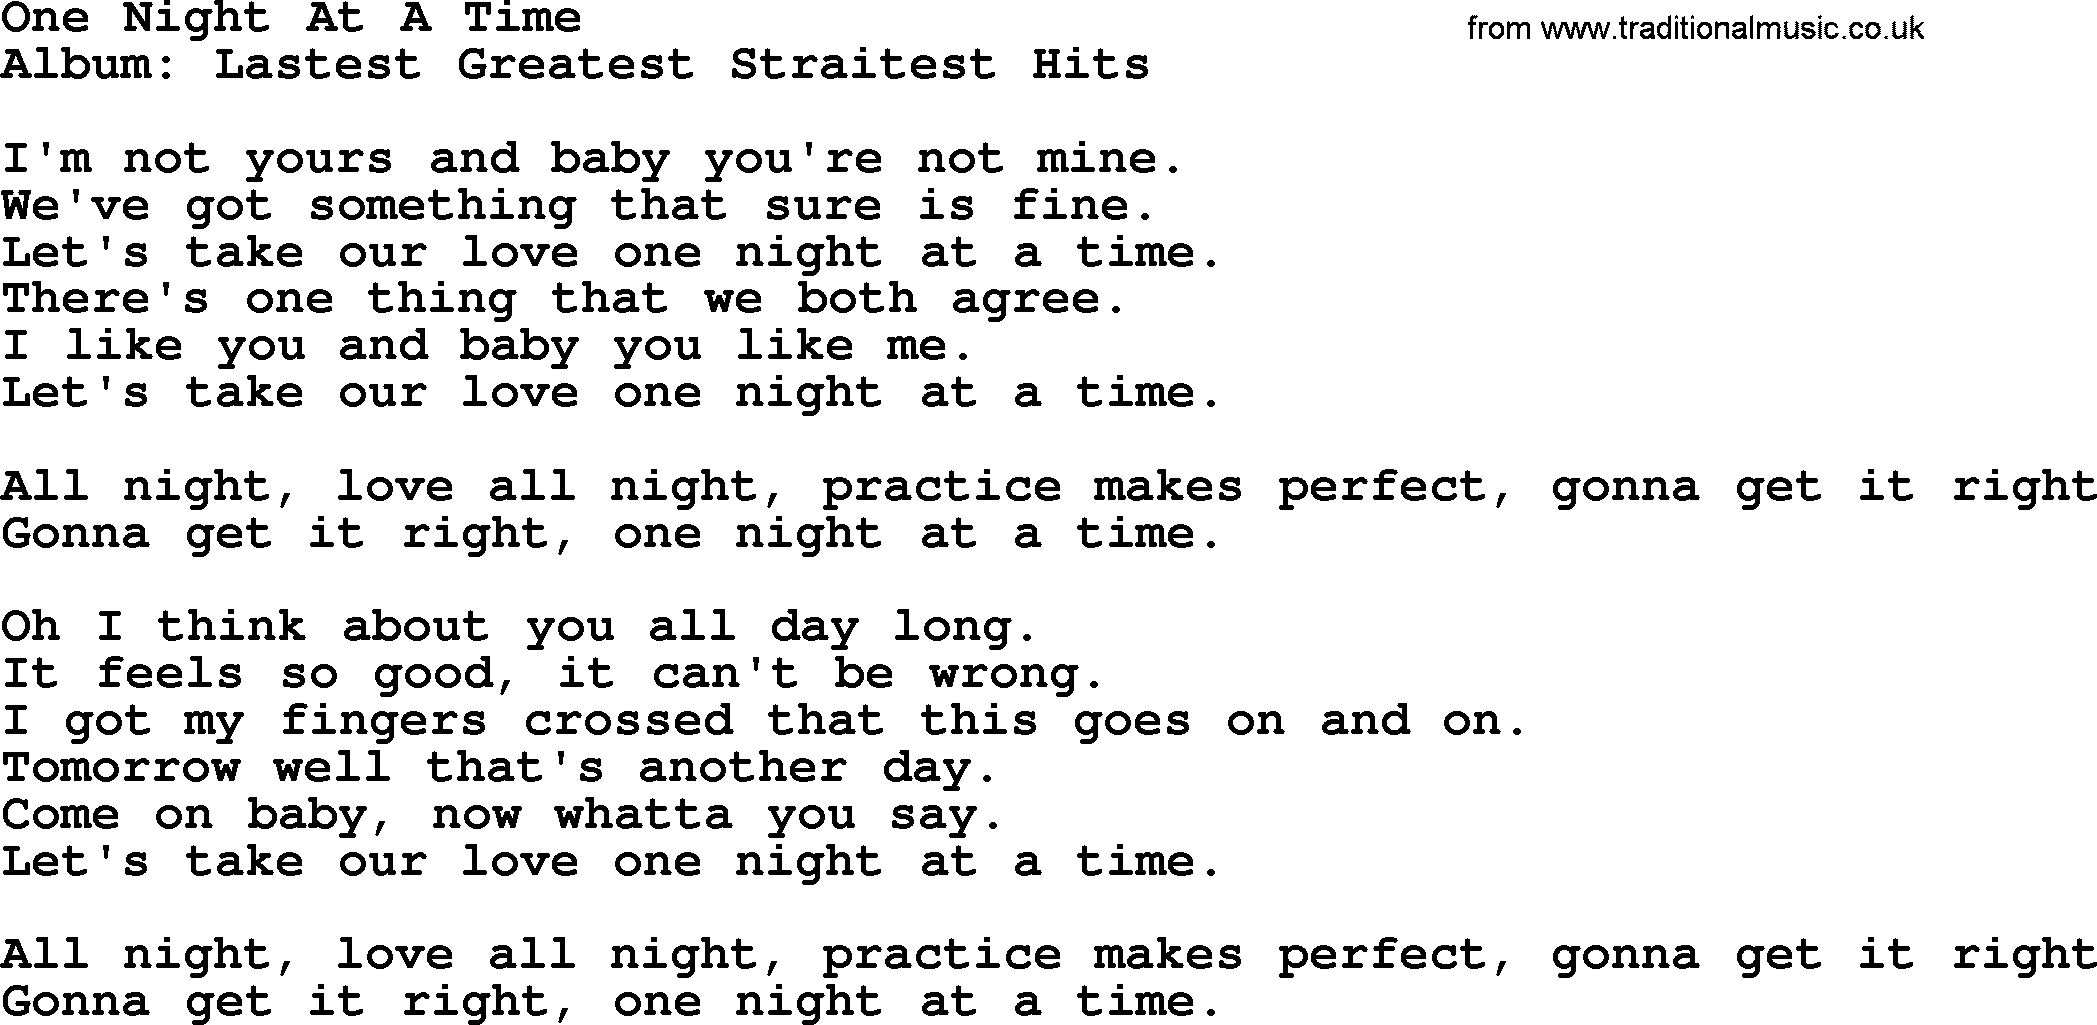 George Strait song: One Night At A Time, lyrics